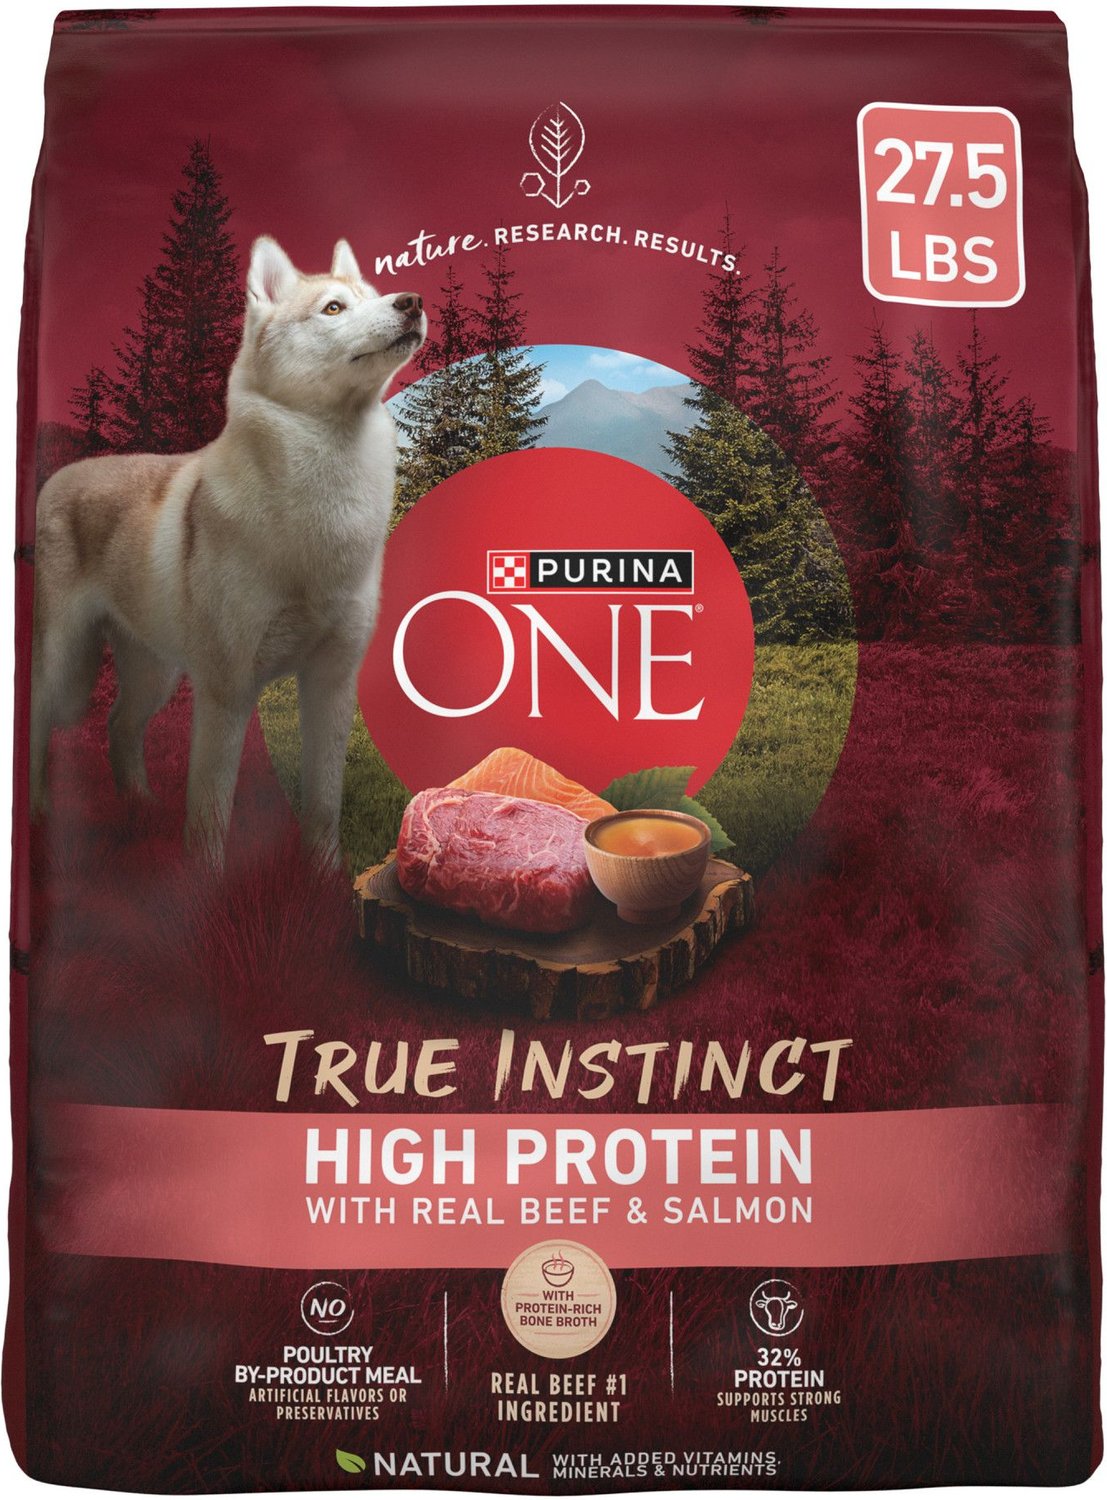 Purina ONE Natural High Protein True Instinct With Real Beef & Salmon Dry Dog Food